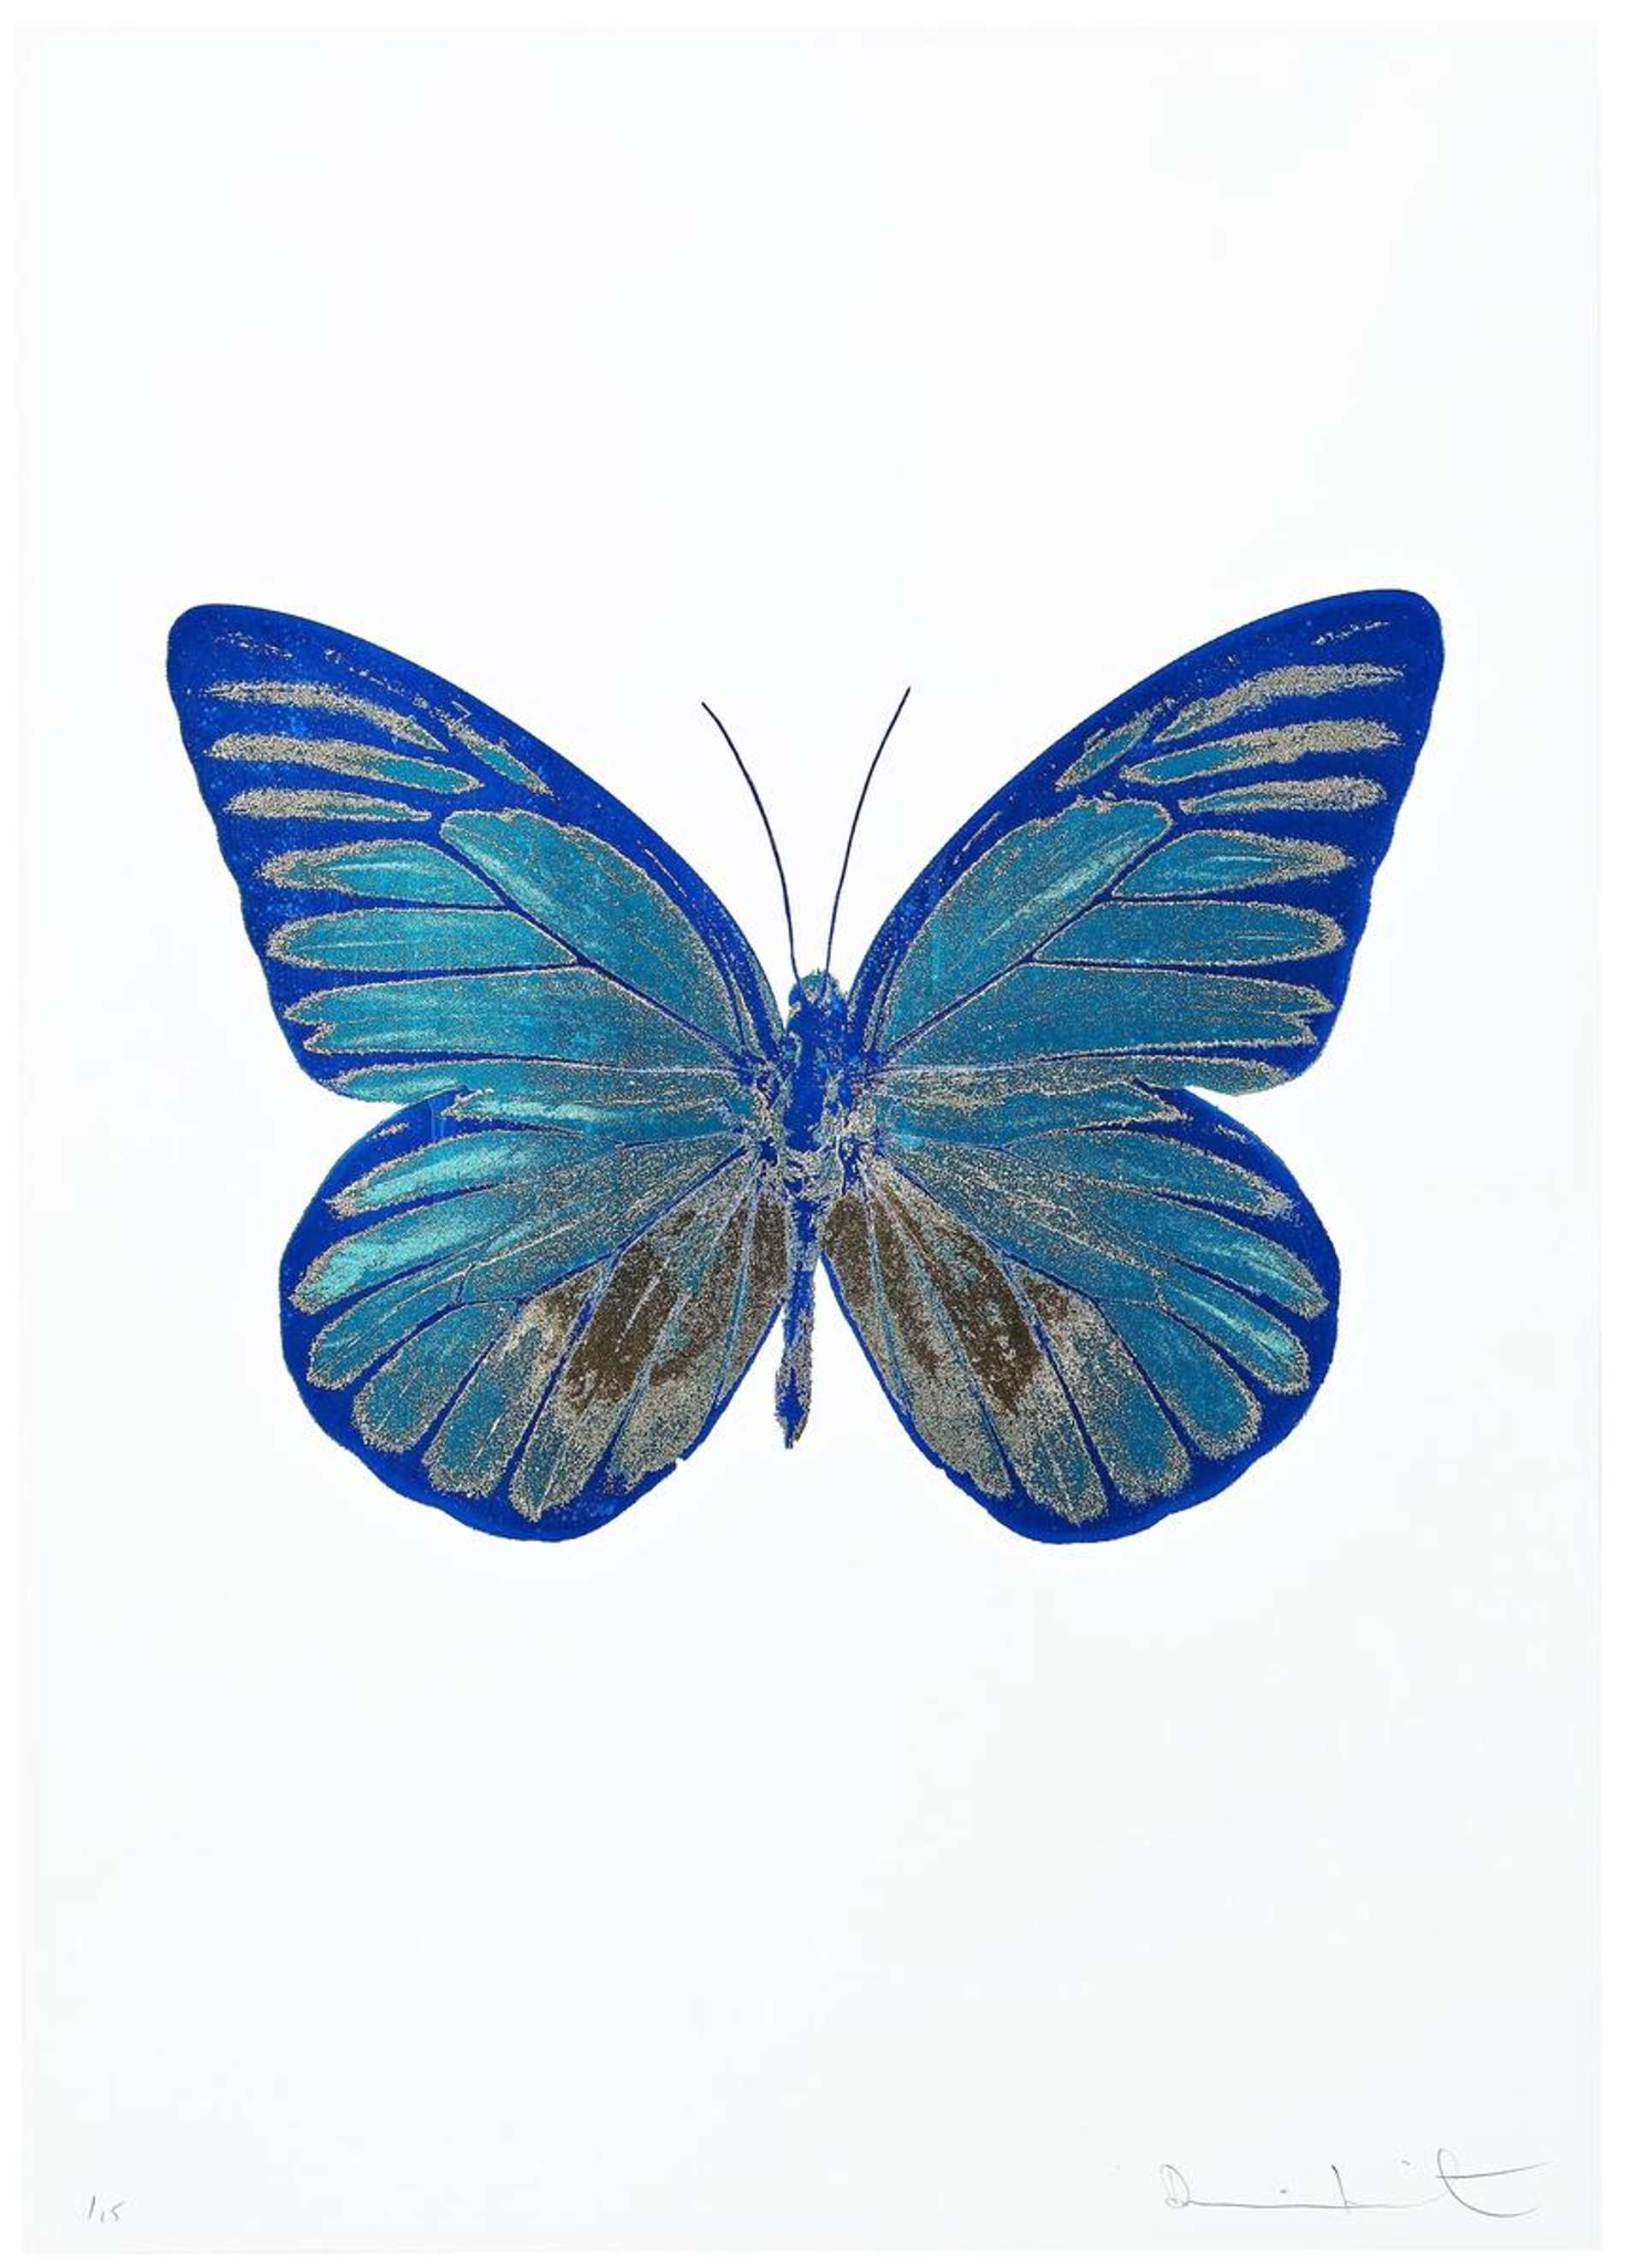 The print shows a large butterfly with its wings outspread, set against a white backdrop. Depicted in topaz, gold and blue, the image of the butterfly has been rendered flat and simplified into block colours, obscuring the fine detail of the real butterfly wings.